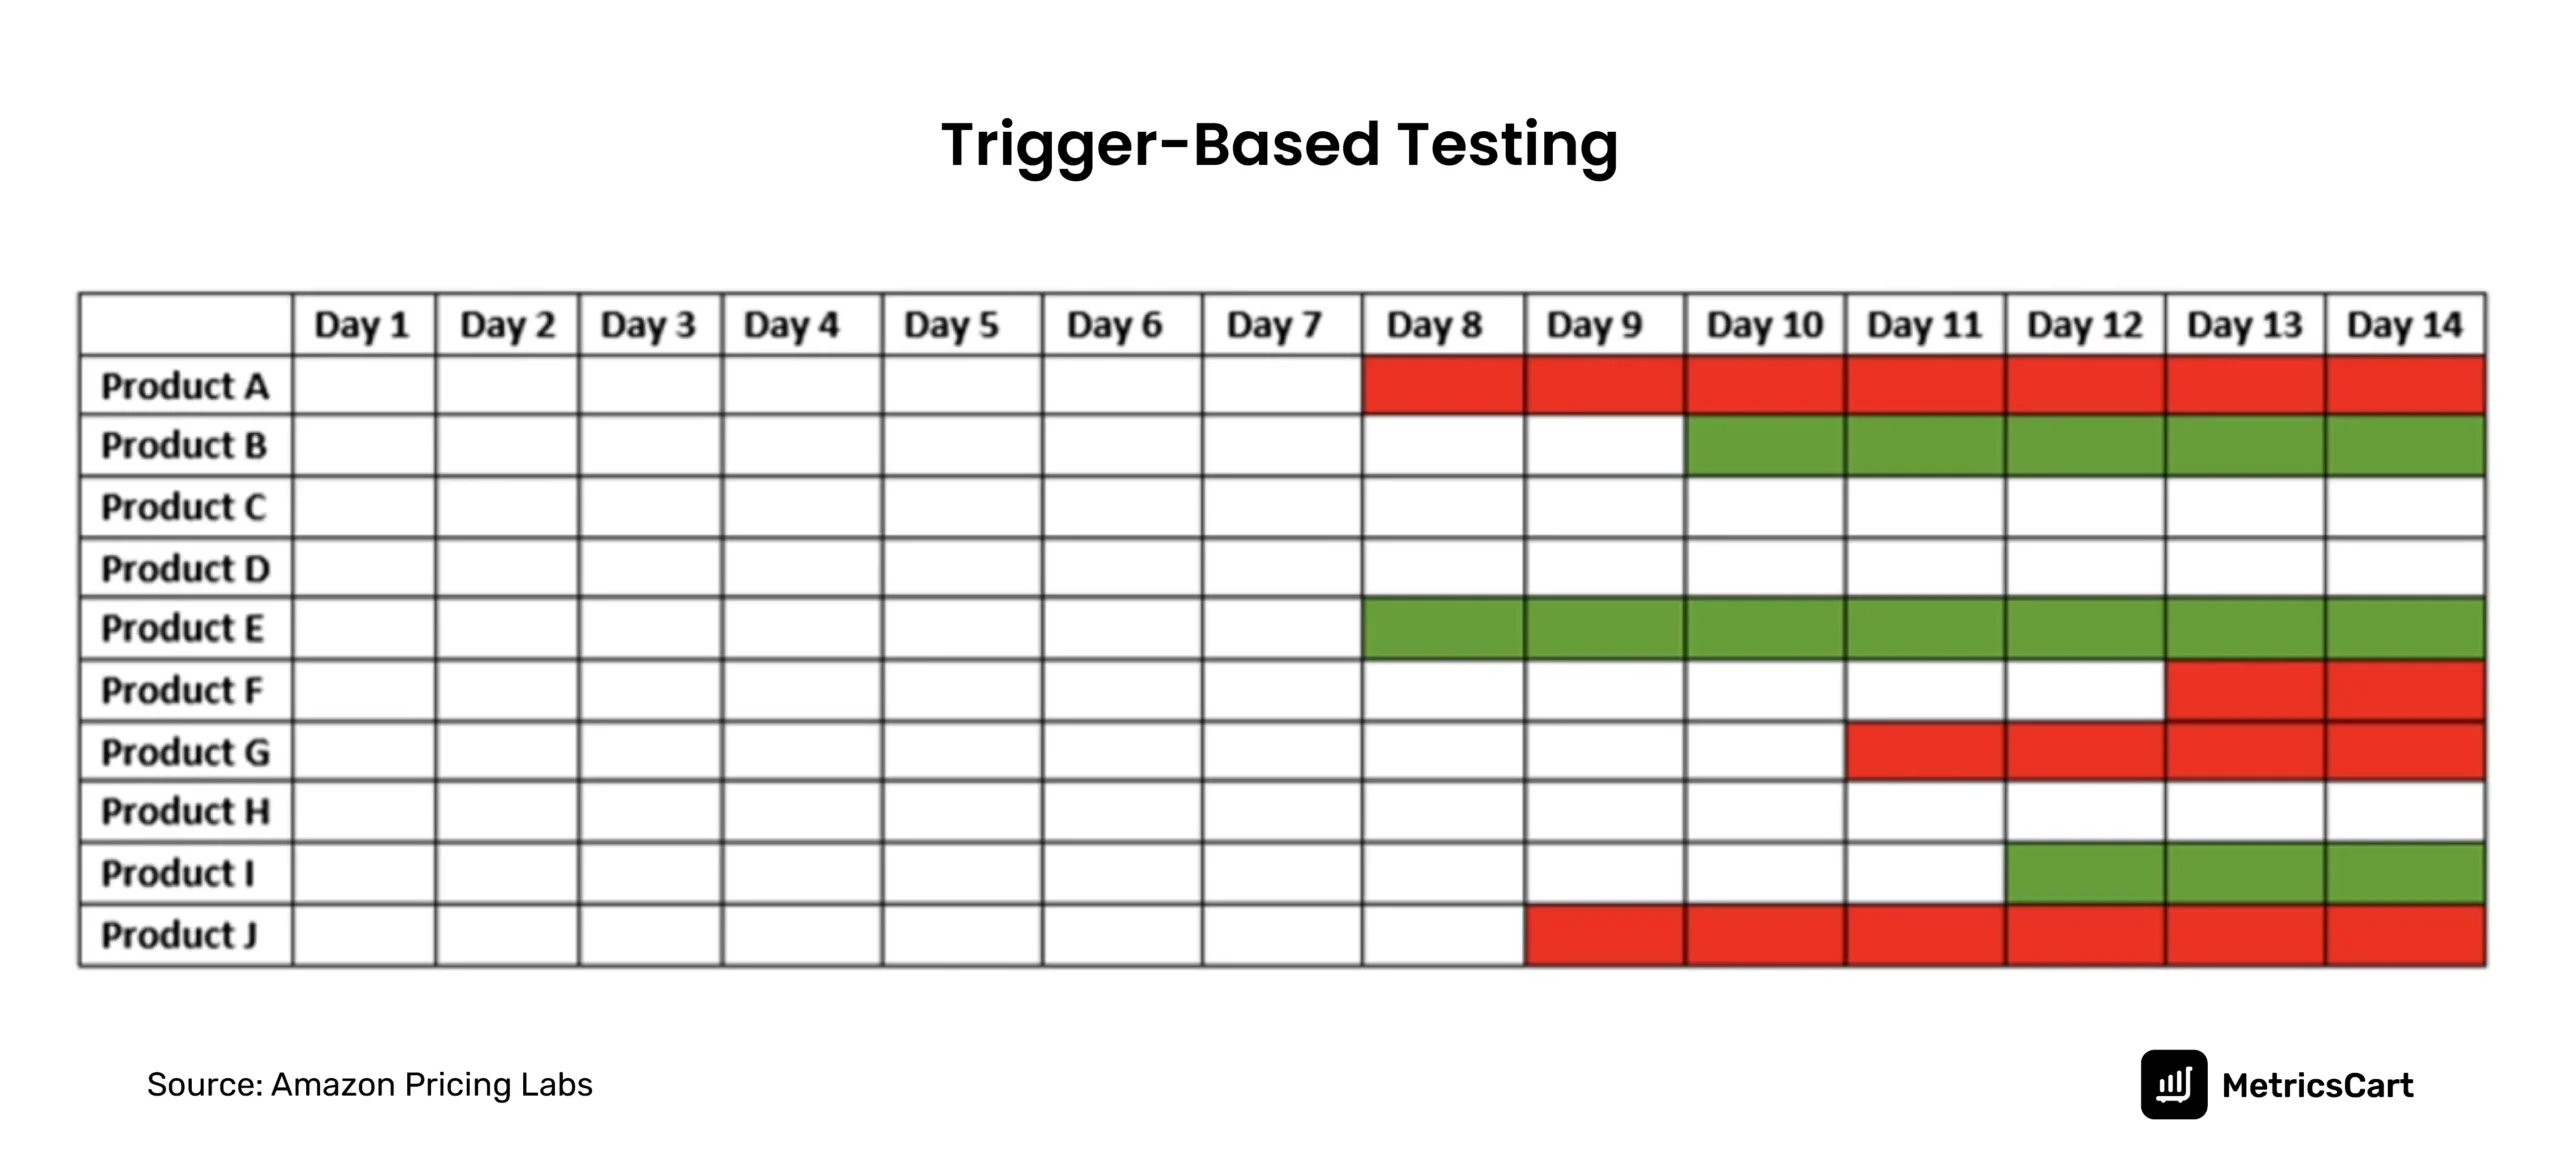 Image of trigger-based testing conducted by Amazon pricing labs